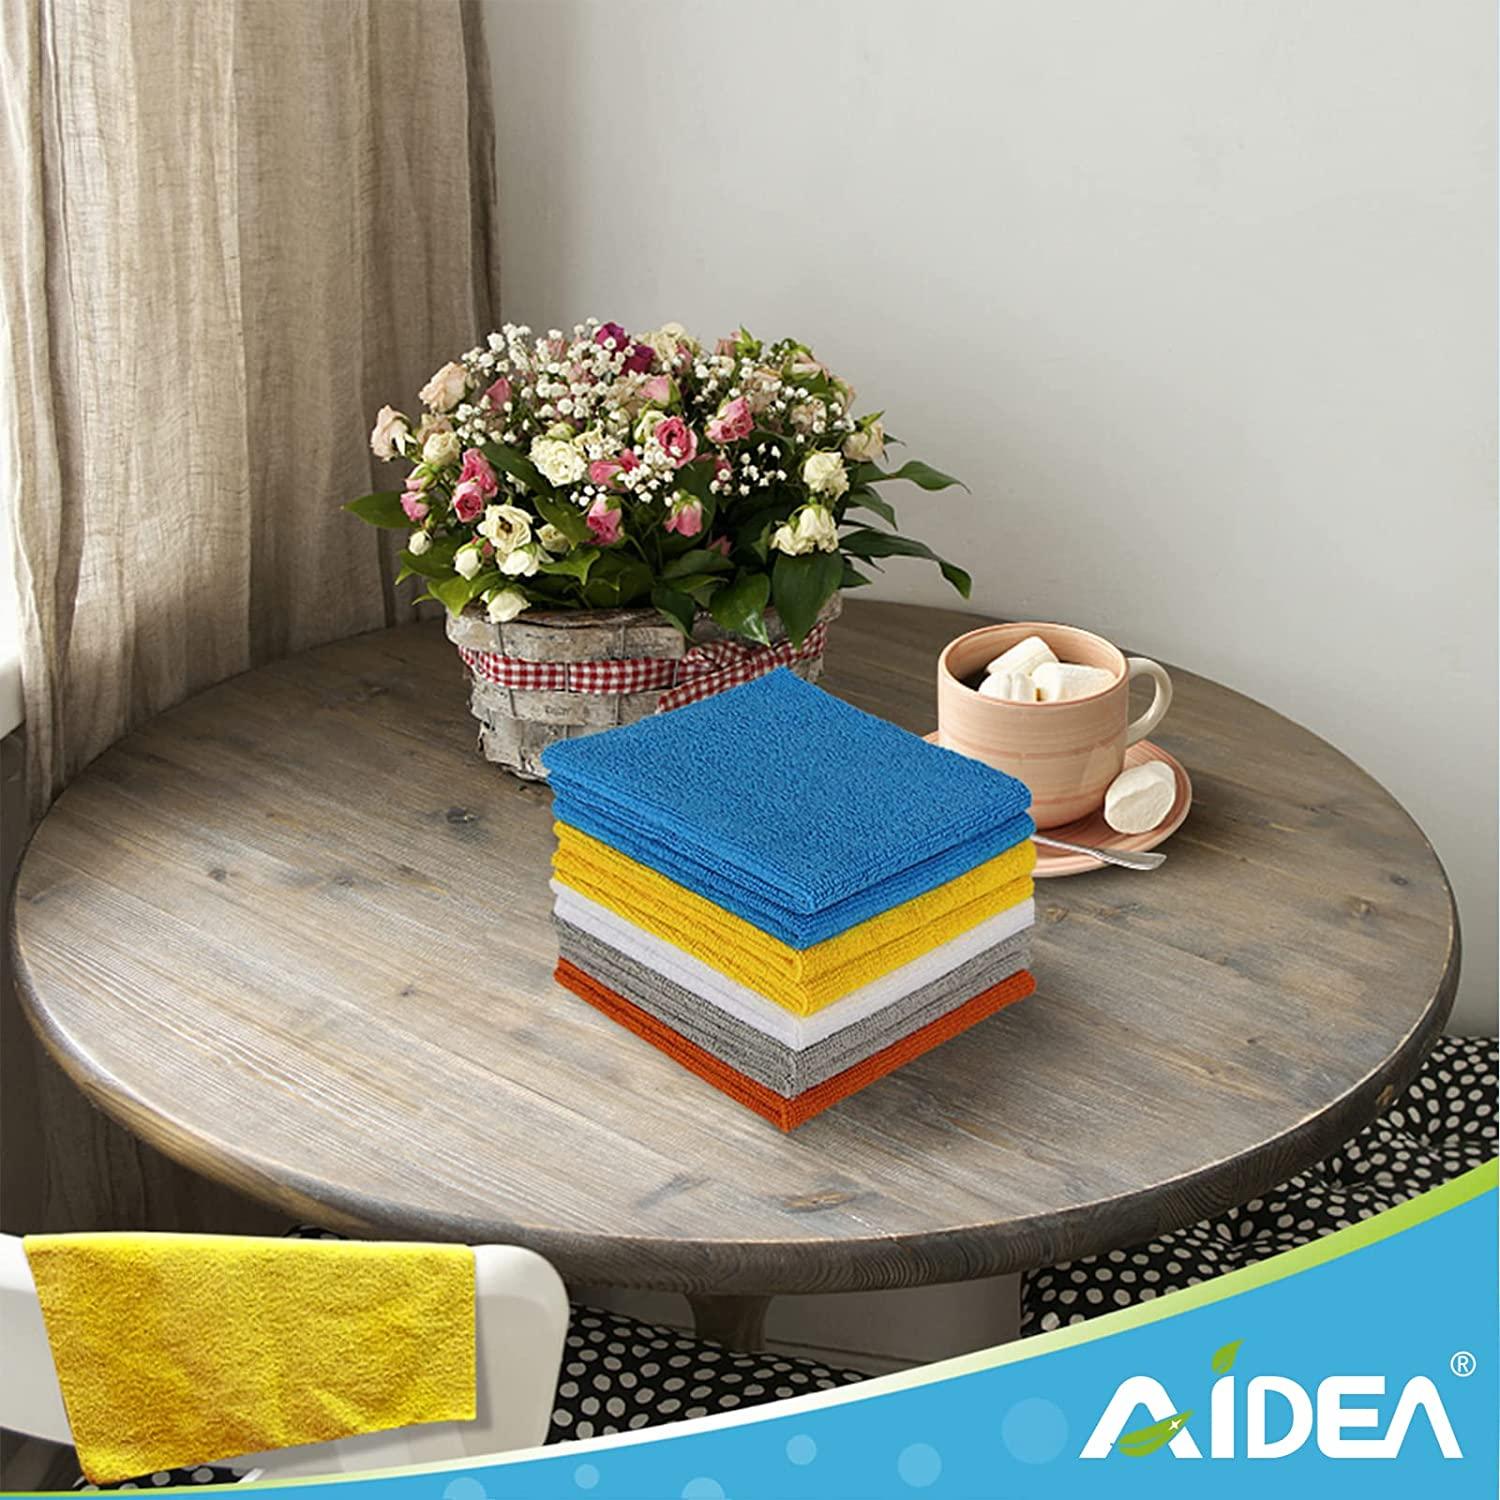 Aidea Kitchen Dish Cloth - 12 Pack, Super Absorbent Coral Fleece